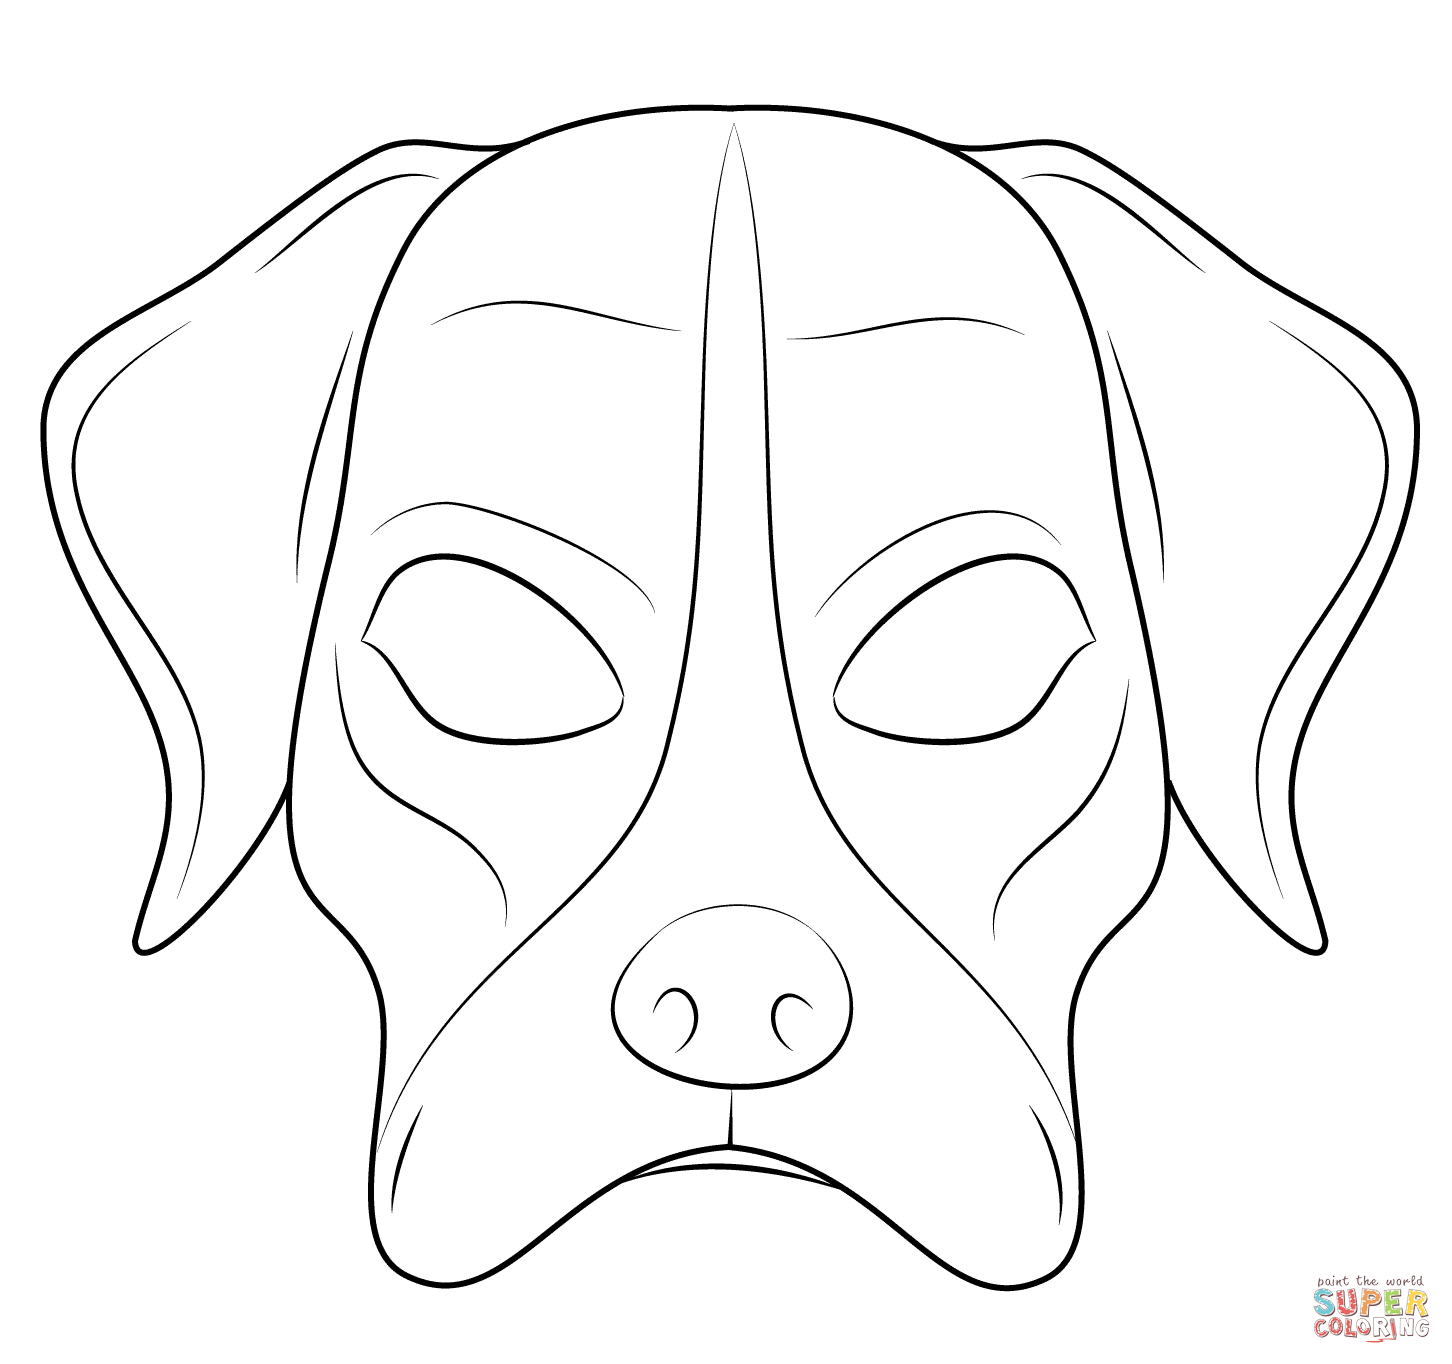 Dog mask coloring page free printable coloring pages